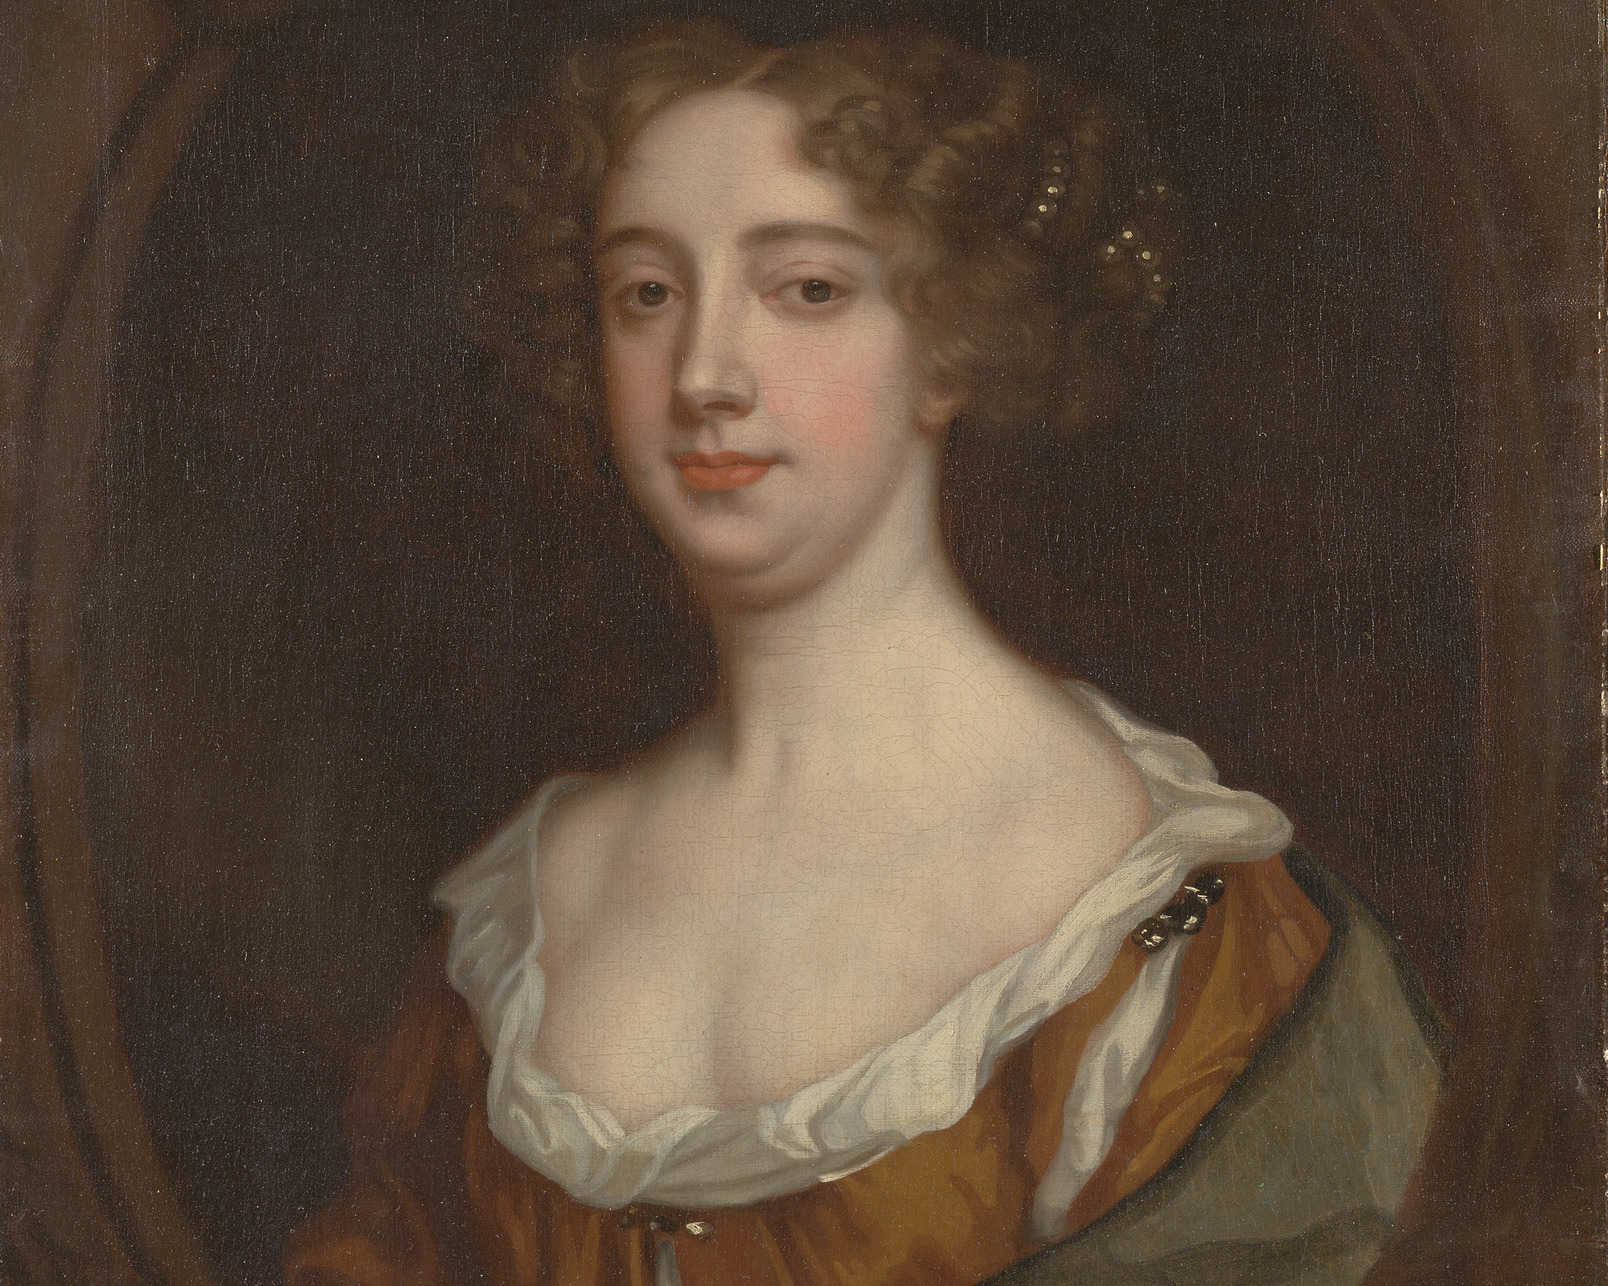 Sir Peter Lely, ritratto di Aphra Behn (1670, Yale Center for British Art, Yale University, New Haven, Connecticut; fonte: en.wikipedia.org).